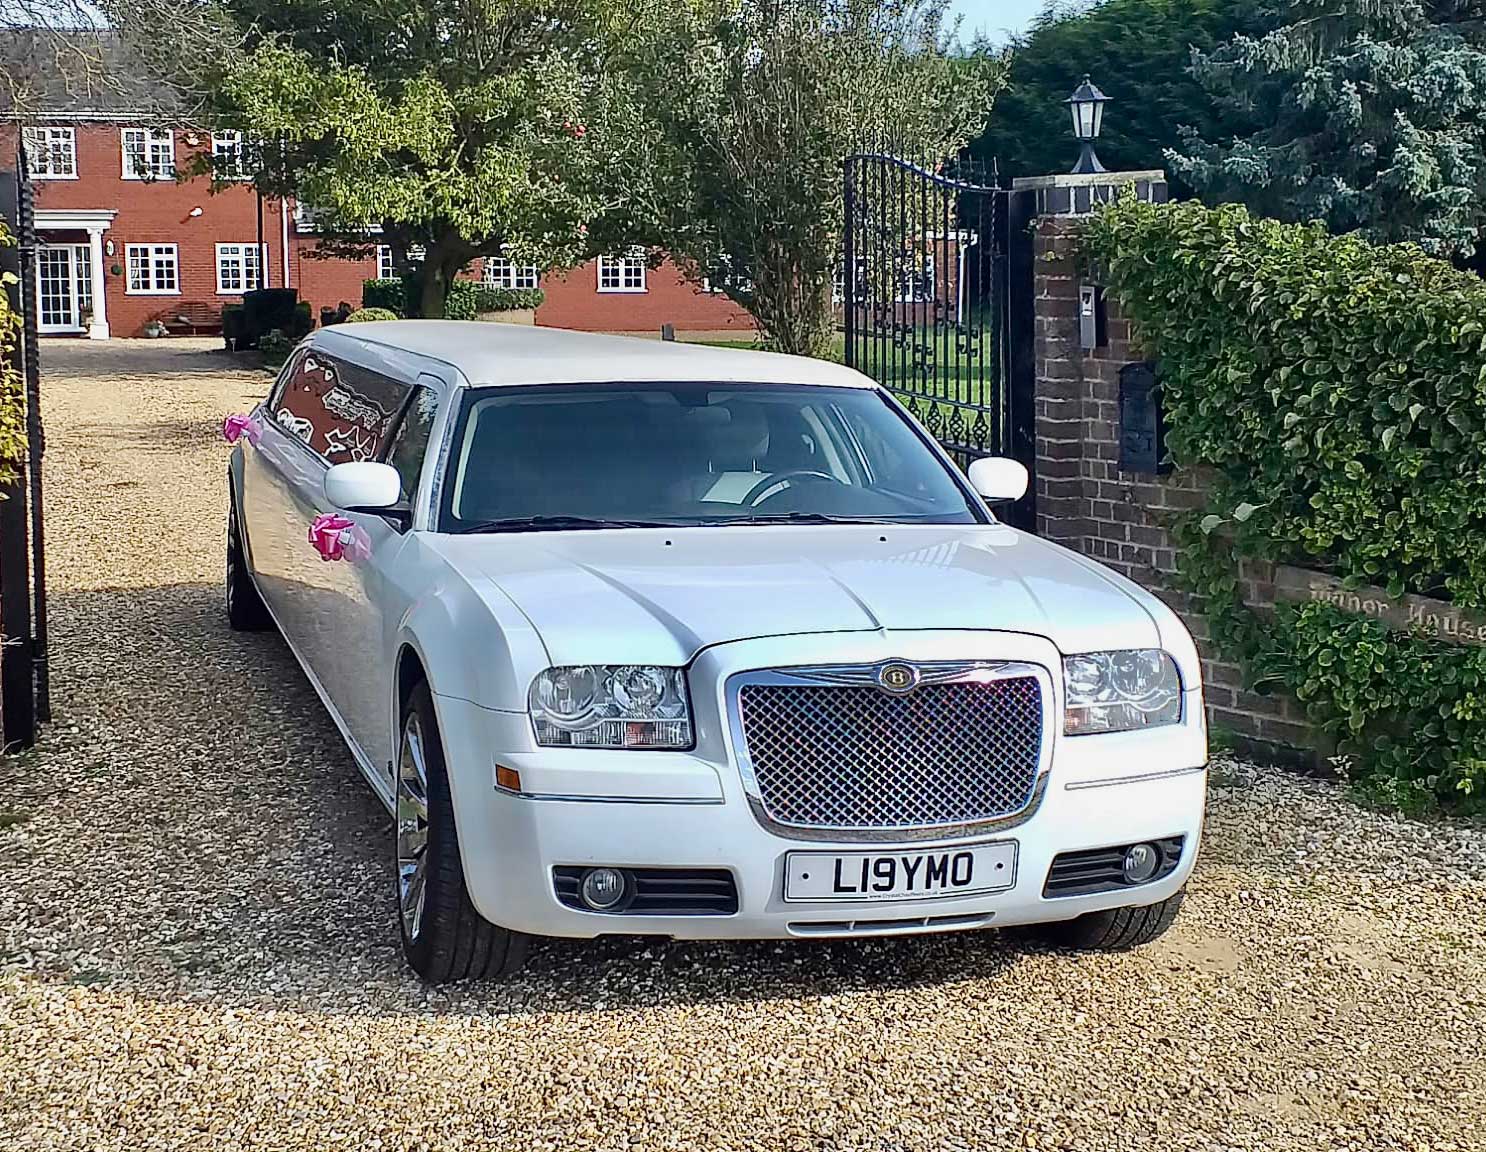 Wedding Limo Hire In Hertfordshire